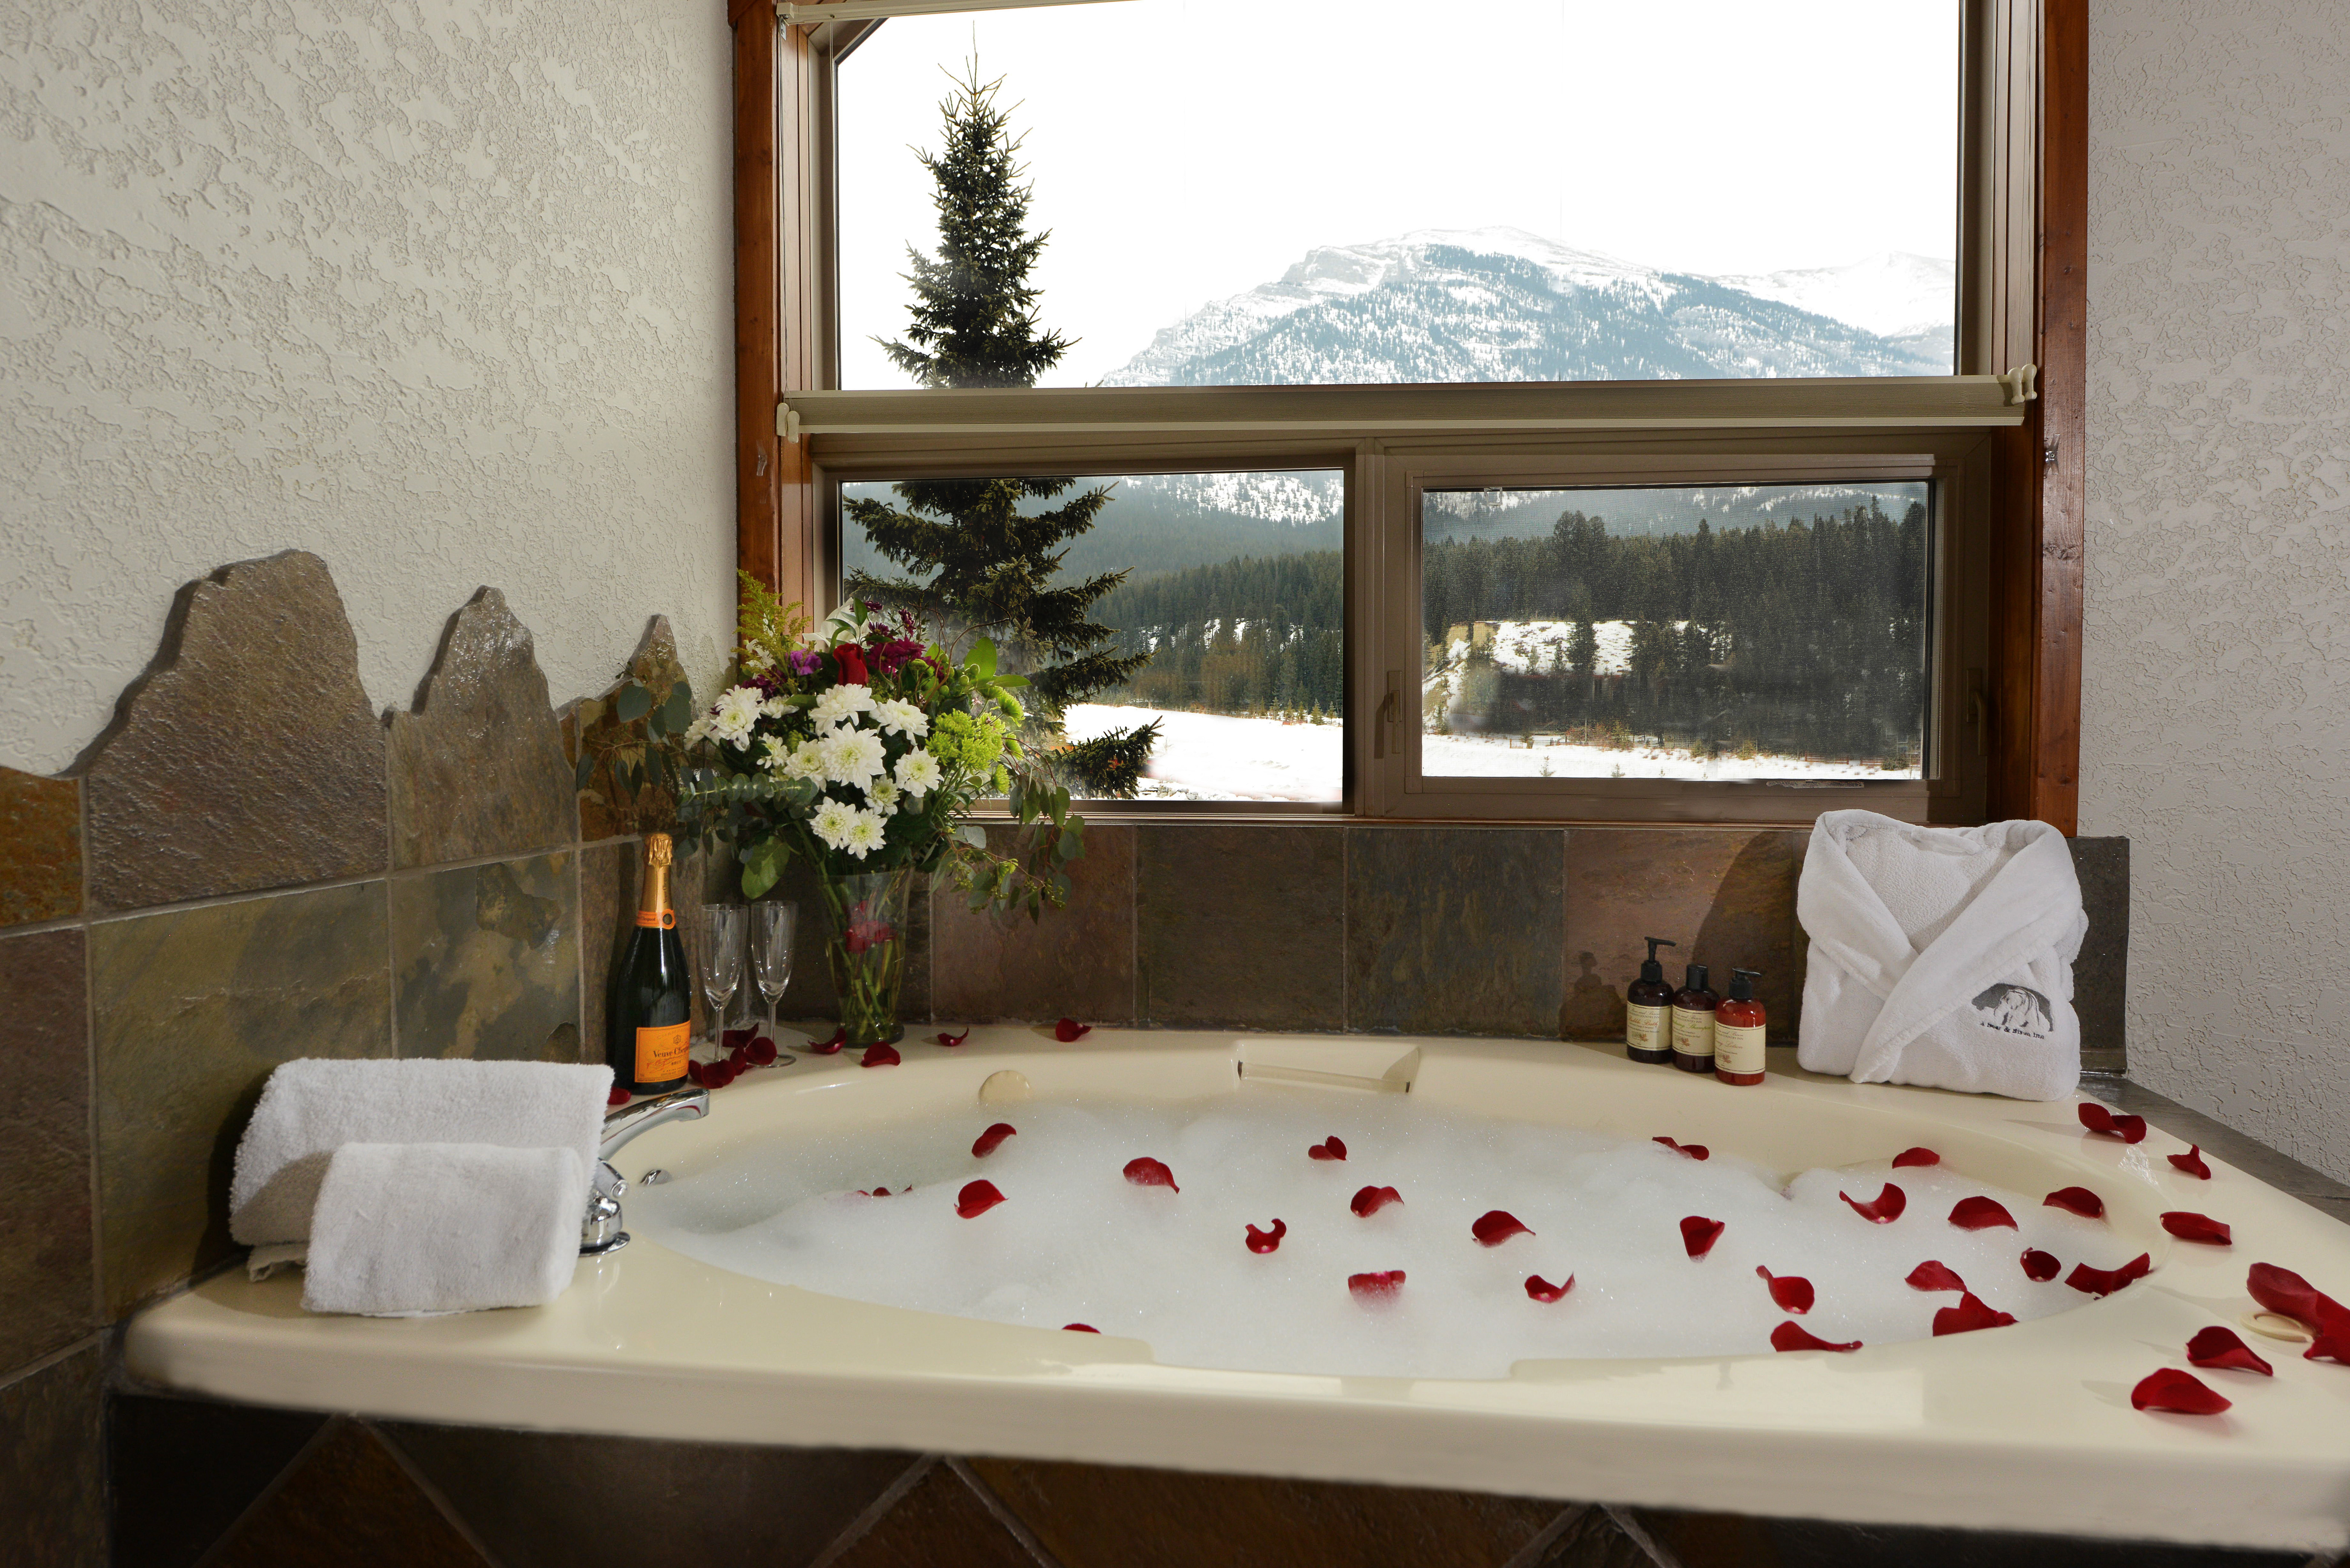 Honeymoon Deluxe King Two Person Jacuzzi Tub